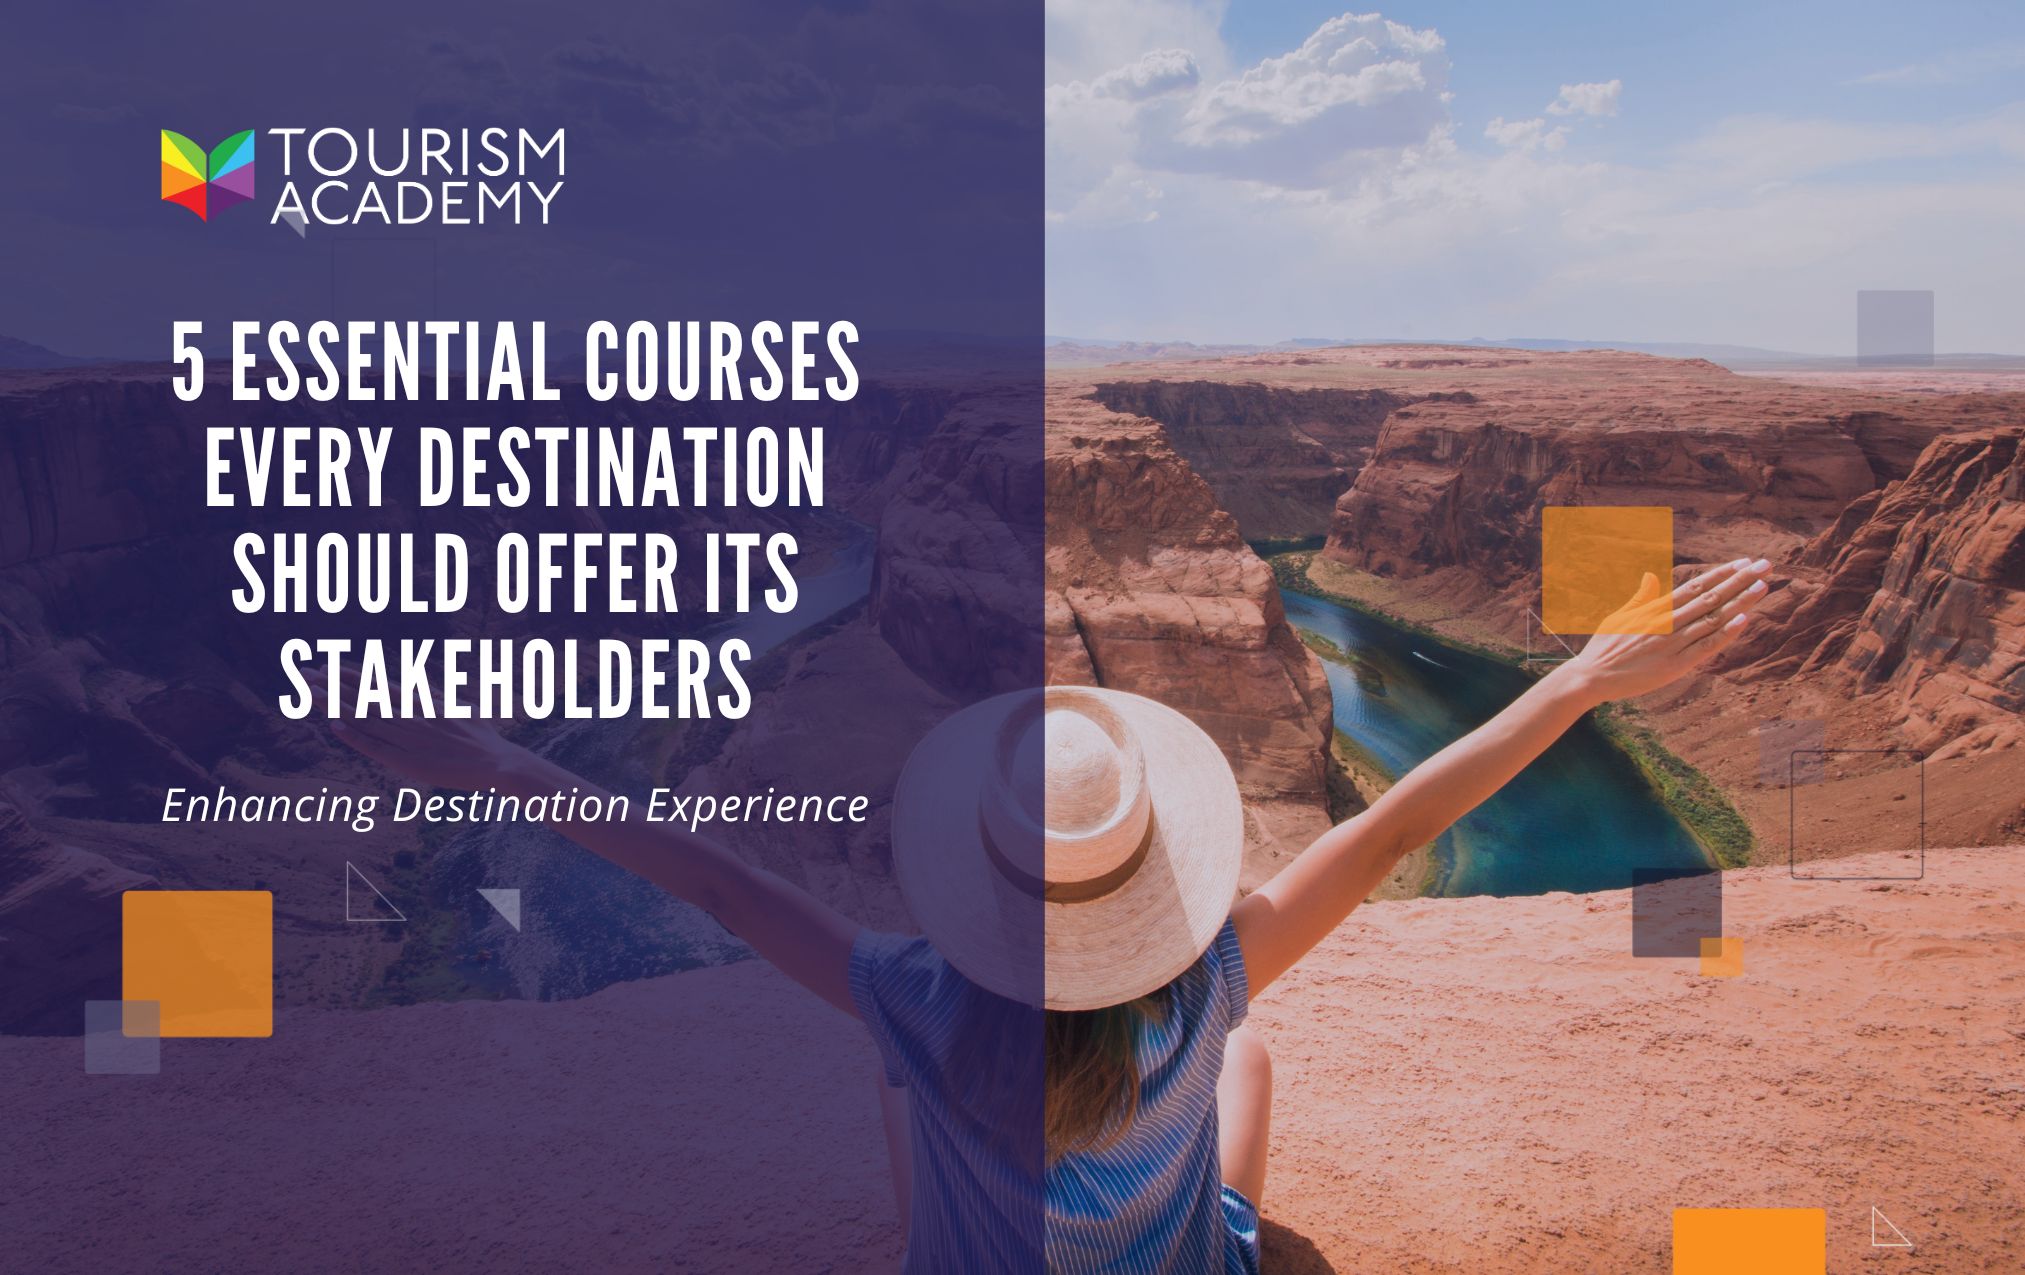 5 Essential Courses Every Tourism Destination Should Offer Its Stakeholders